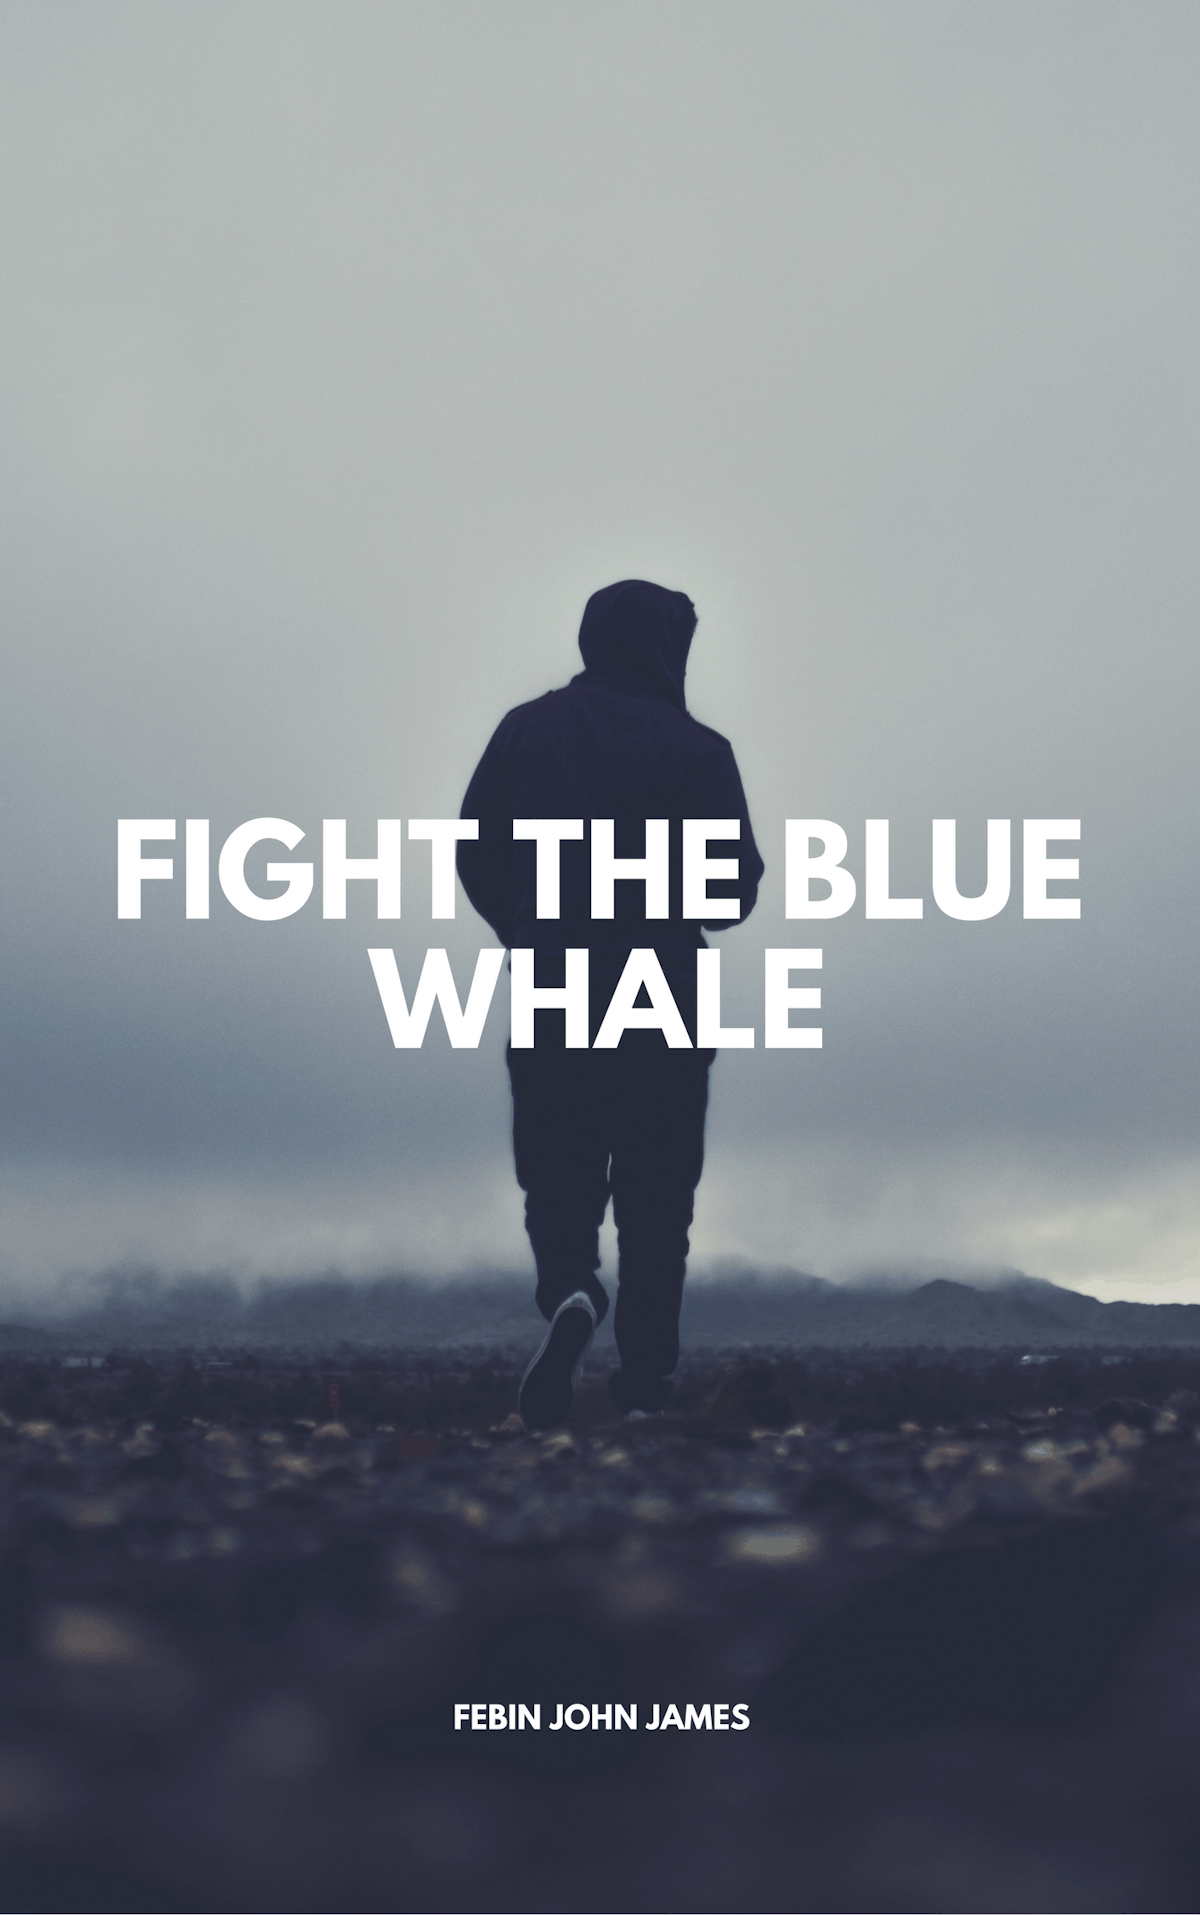 featured image - Fight The Blue Whale